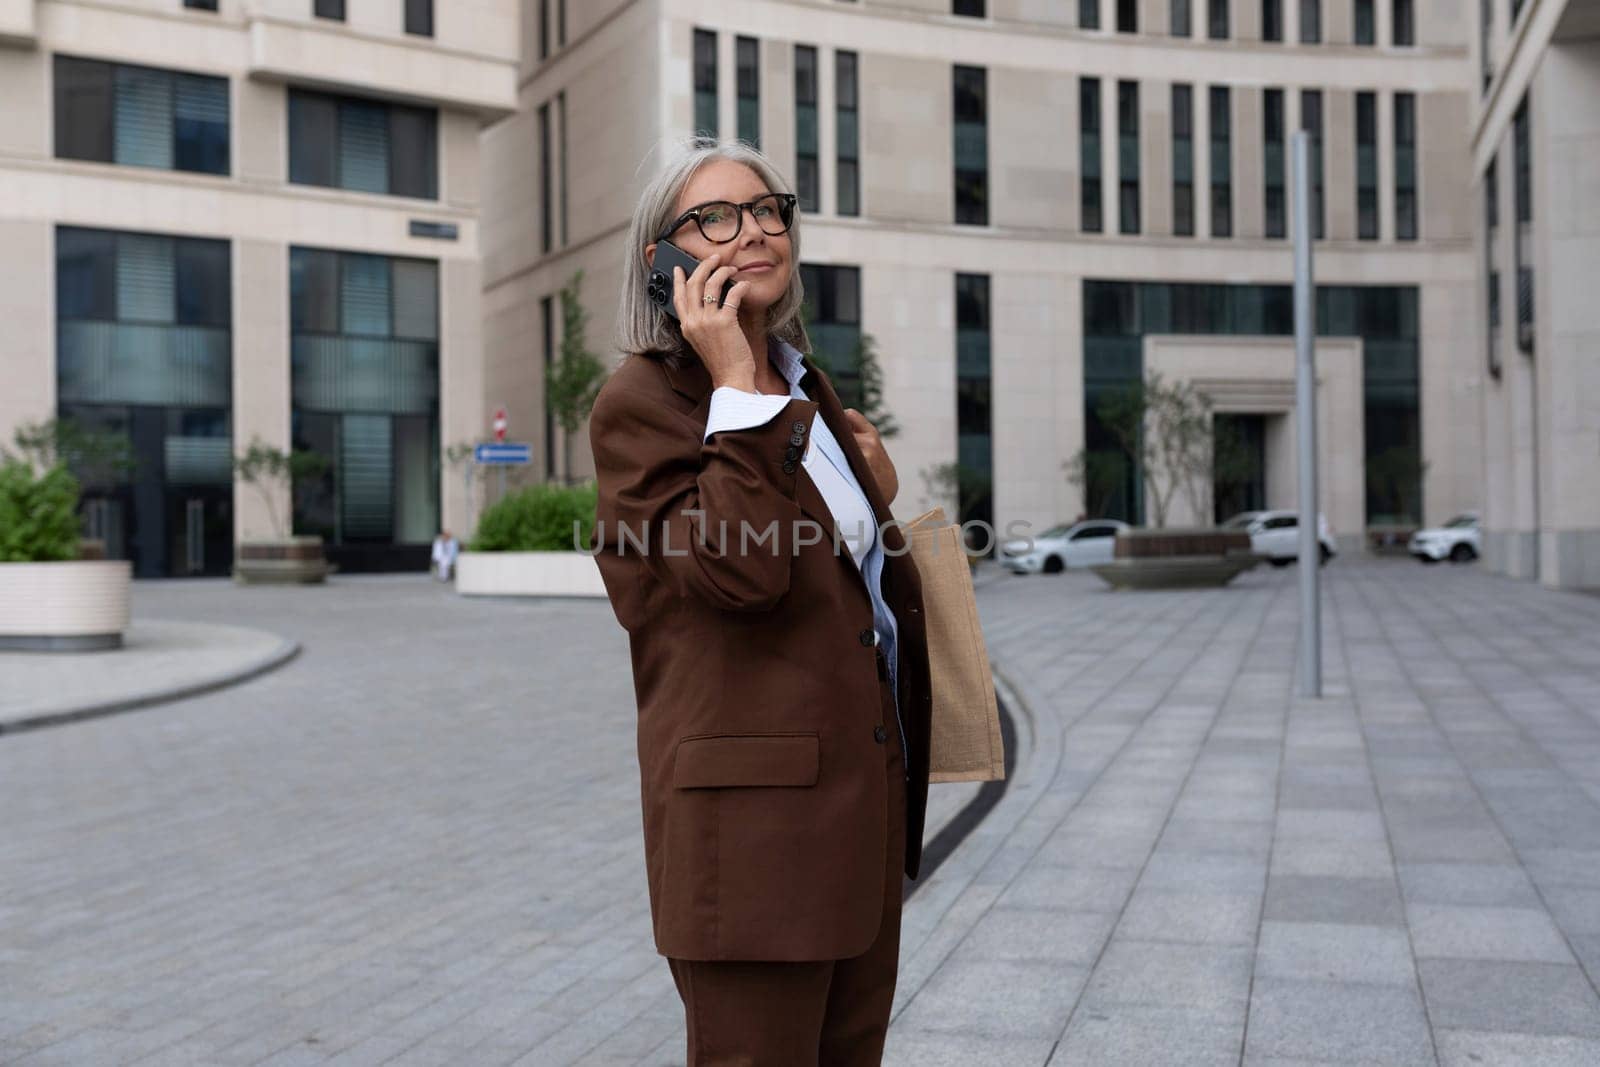 pretty gray-haired retired woman dressed in an elegant suit talking on the phone while walking down the street.